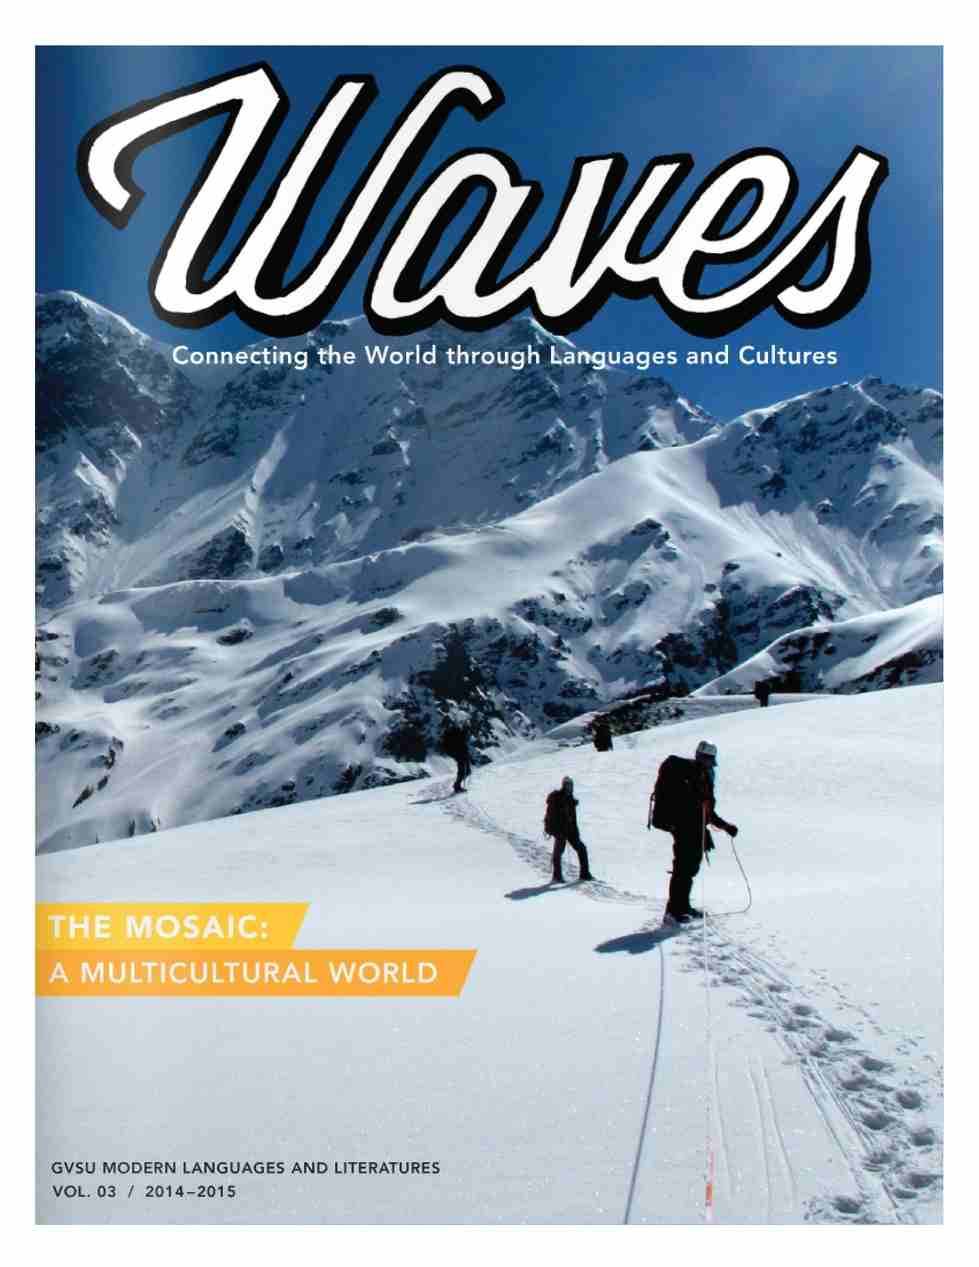 Waves Vol. 3: The Mosaic: A Multicultural World